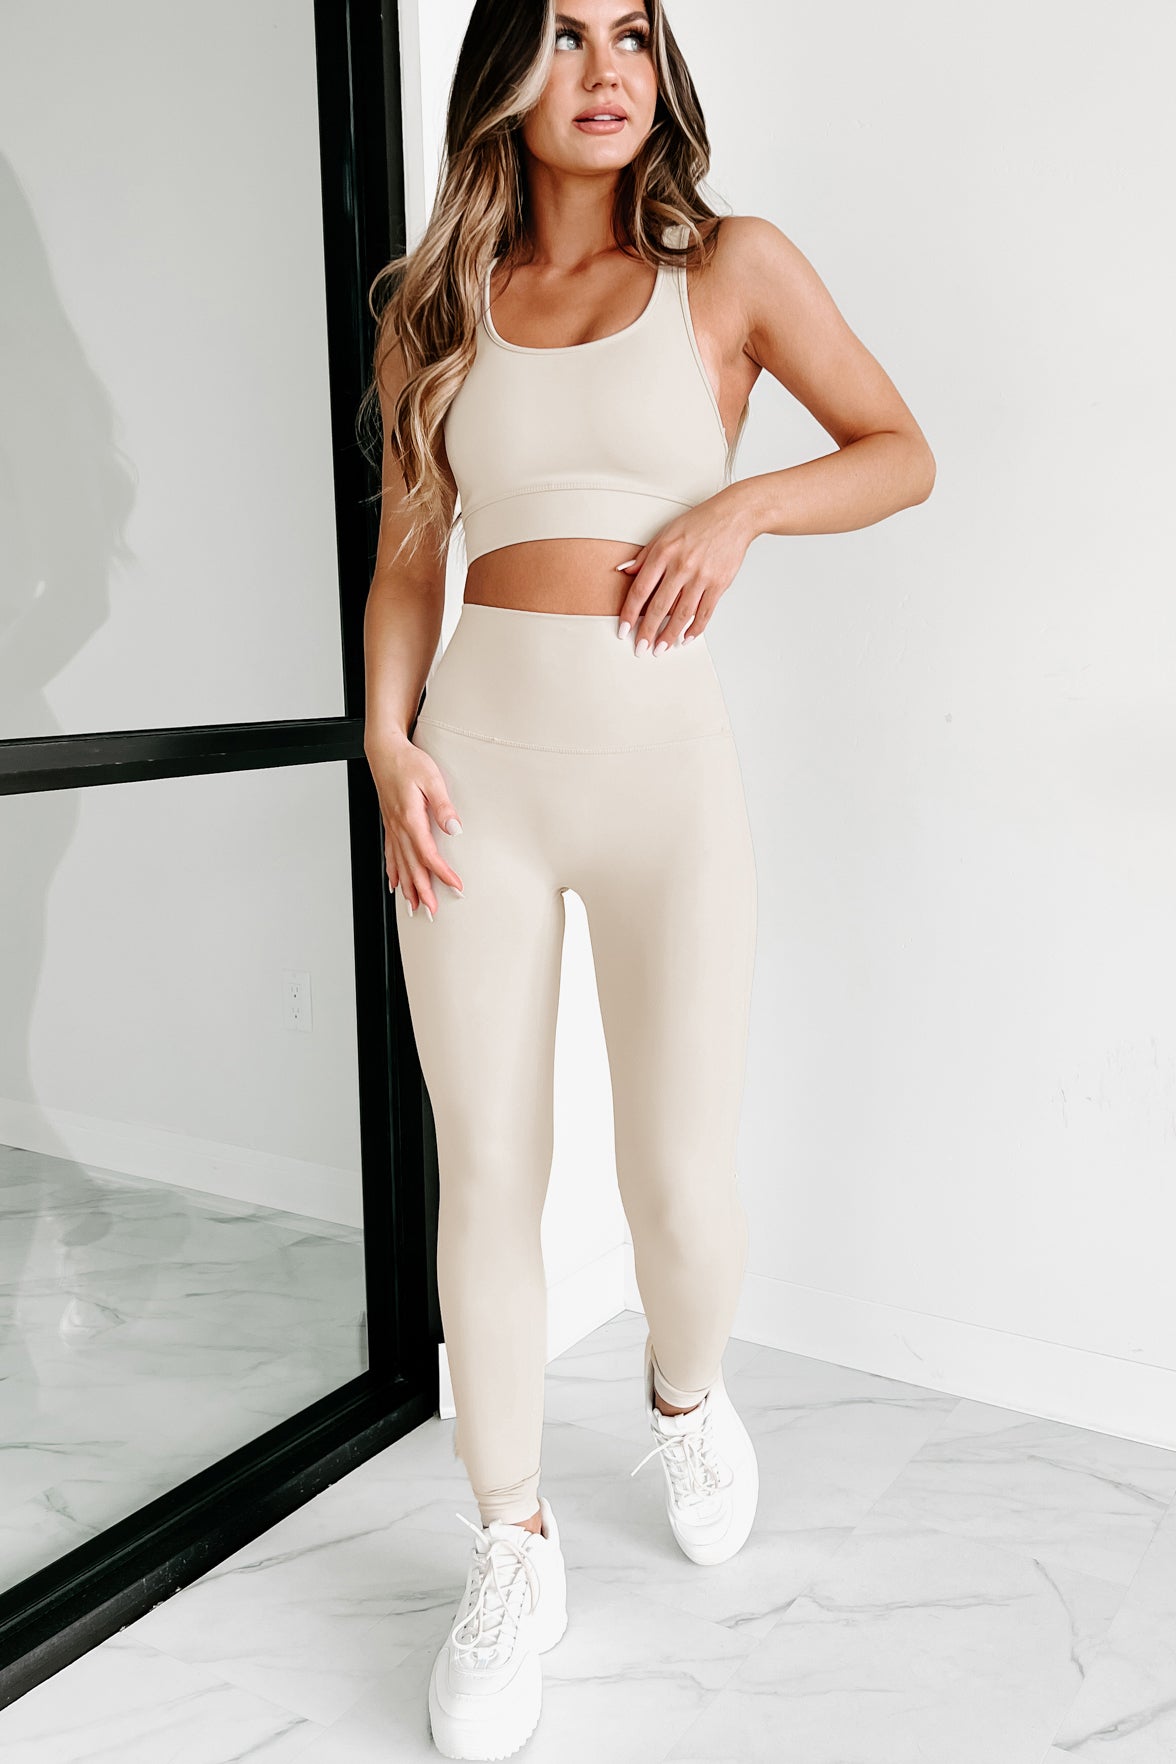 Out Here Lifting Weights Two Piece Legging Set (Beige) - NanaMacs